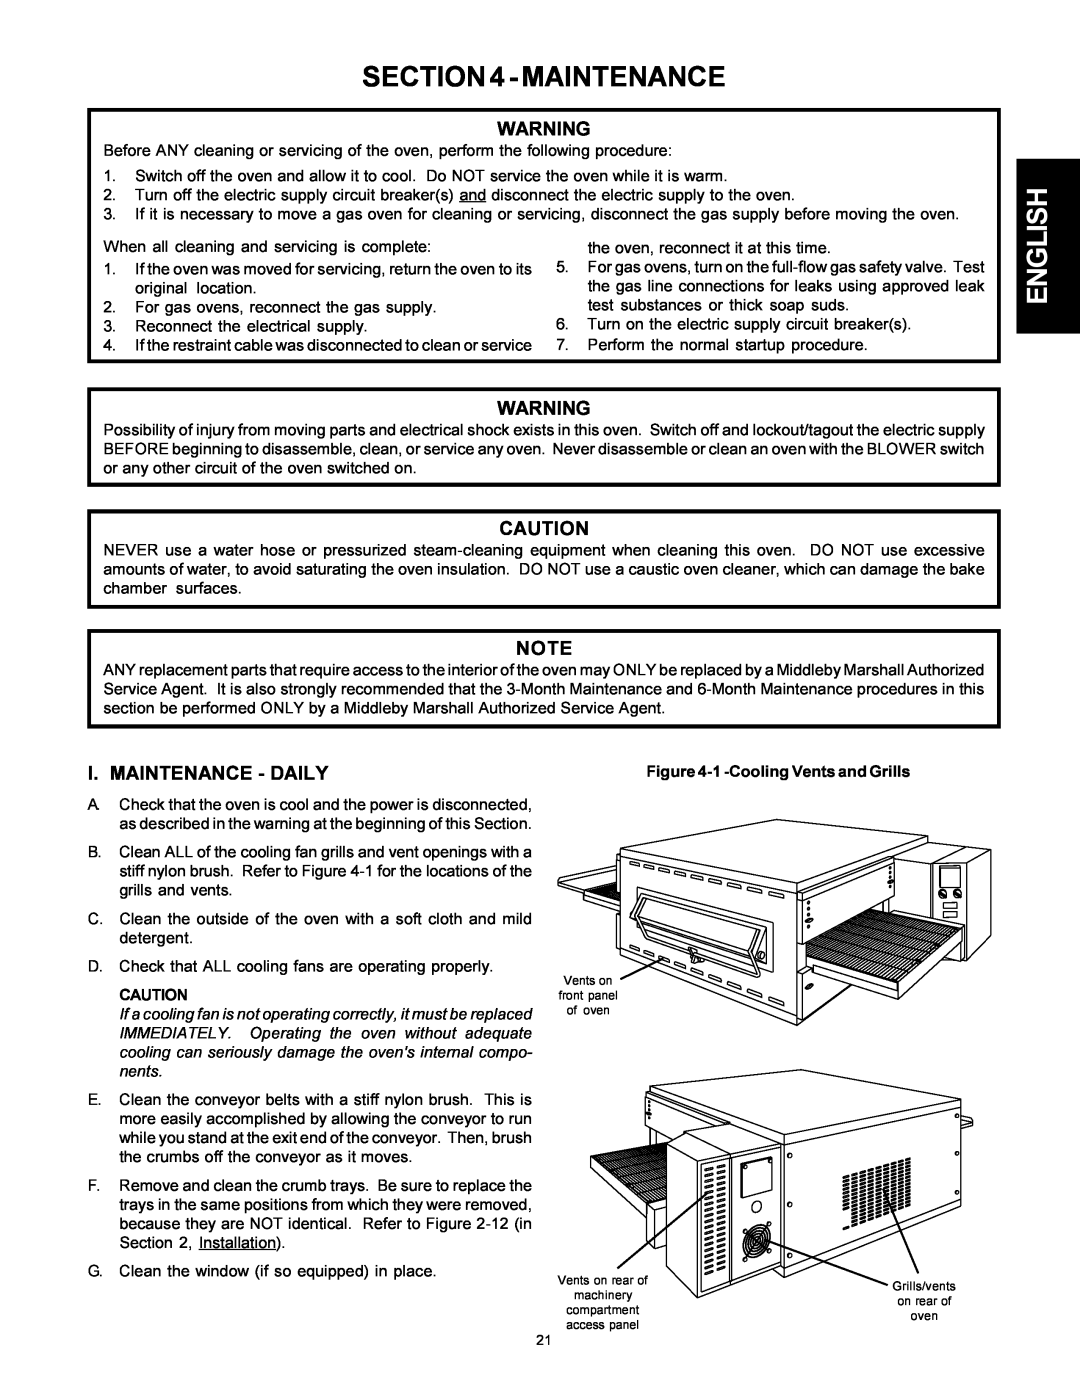 Middleby Marshall Model PS536 installation manual I. Maintenance - Daily, 1 -Cooling Vents and Grills 